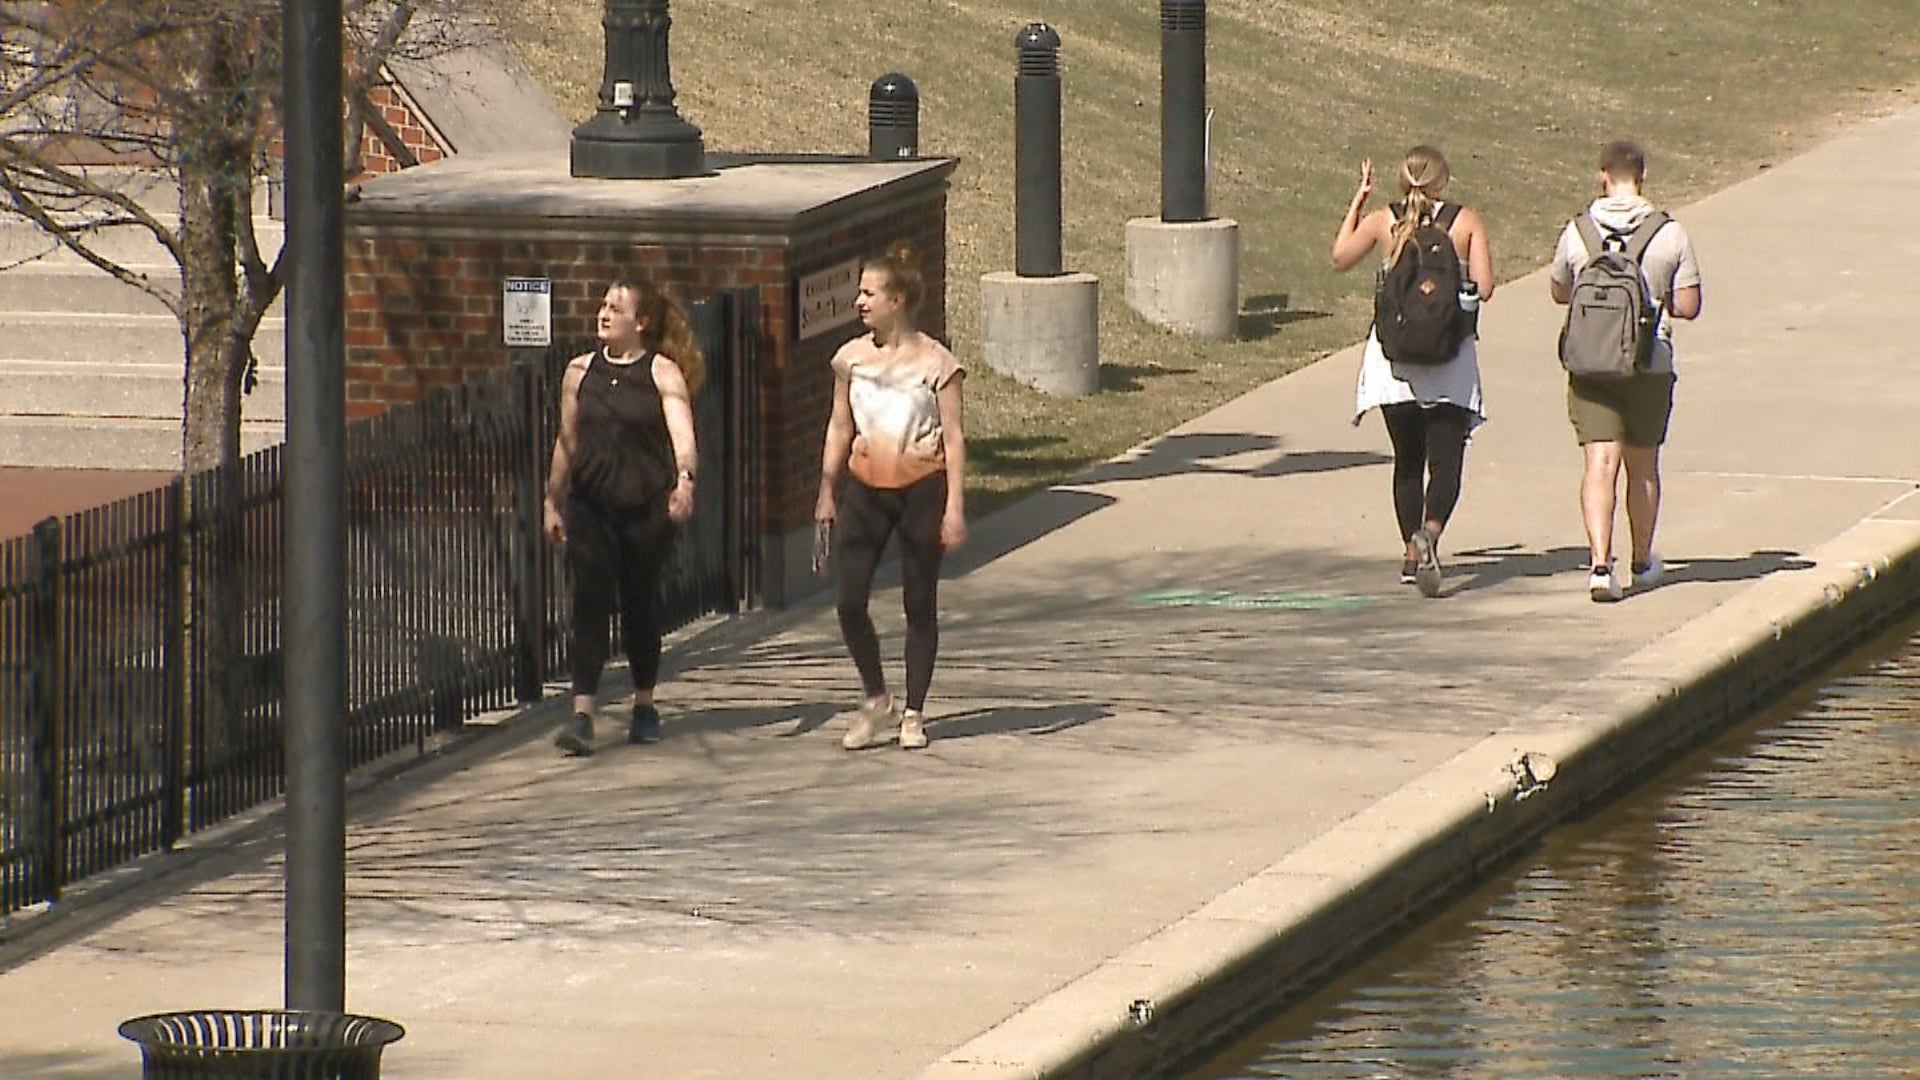 Coronavirus pandemic fueled new fitness trends, research shows – WISH-TV | Indianapolis News | Indiana Weather